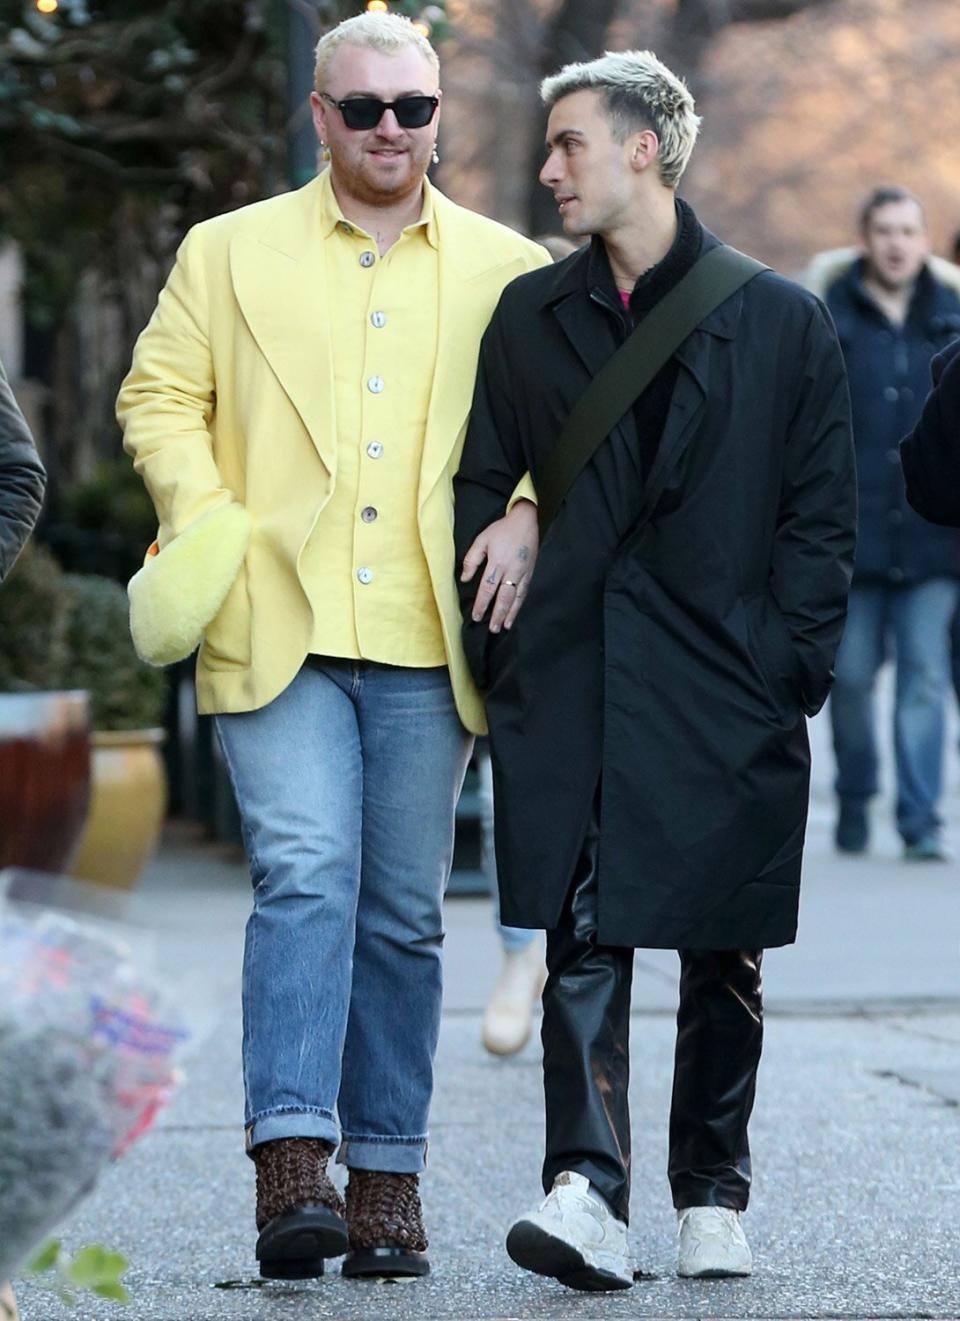 Singer Sam Smith sports a yellow jacket, rolled-up jeans and Bottega Veneta lug boots as they kiss a male friend while locking arms in Soho in New York City.